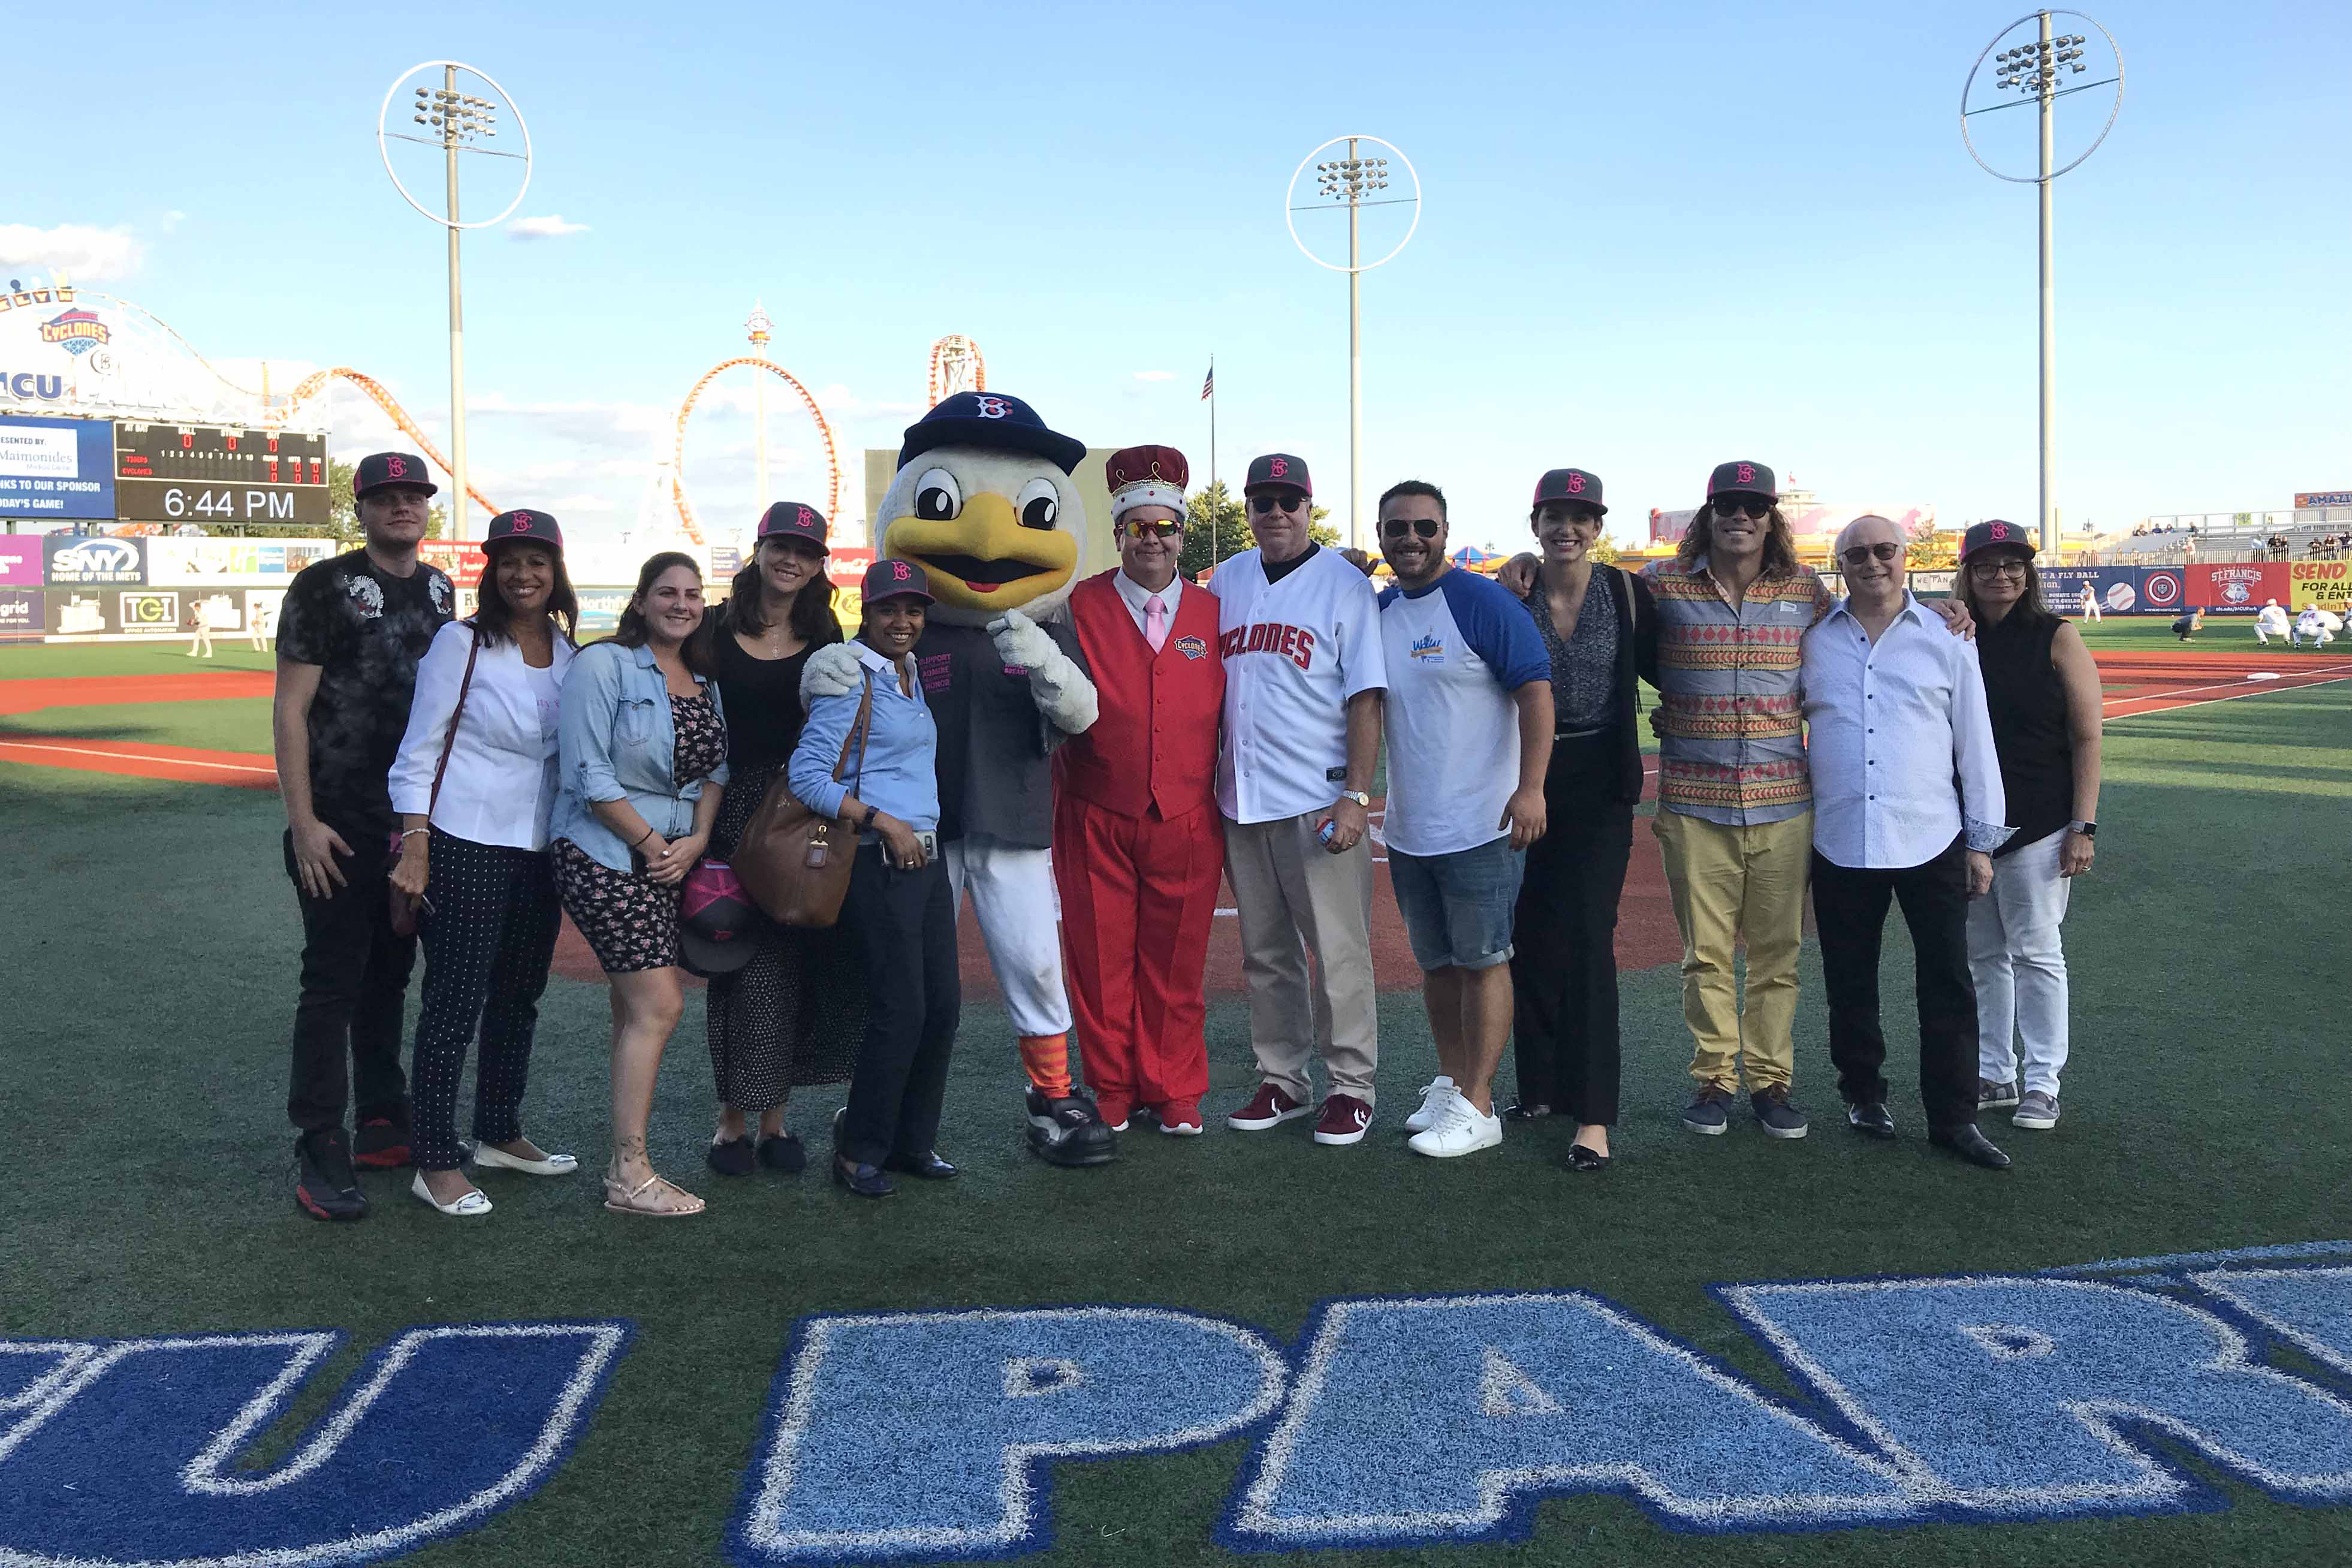 Dr. Patrick Borgen Honored at Brooklyn Cyclones Game